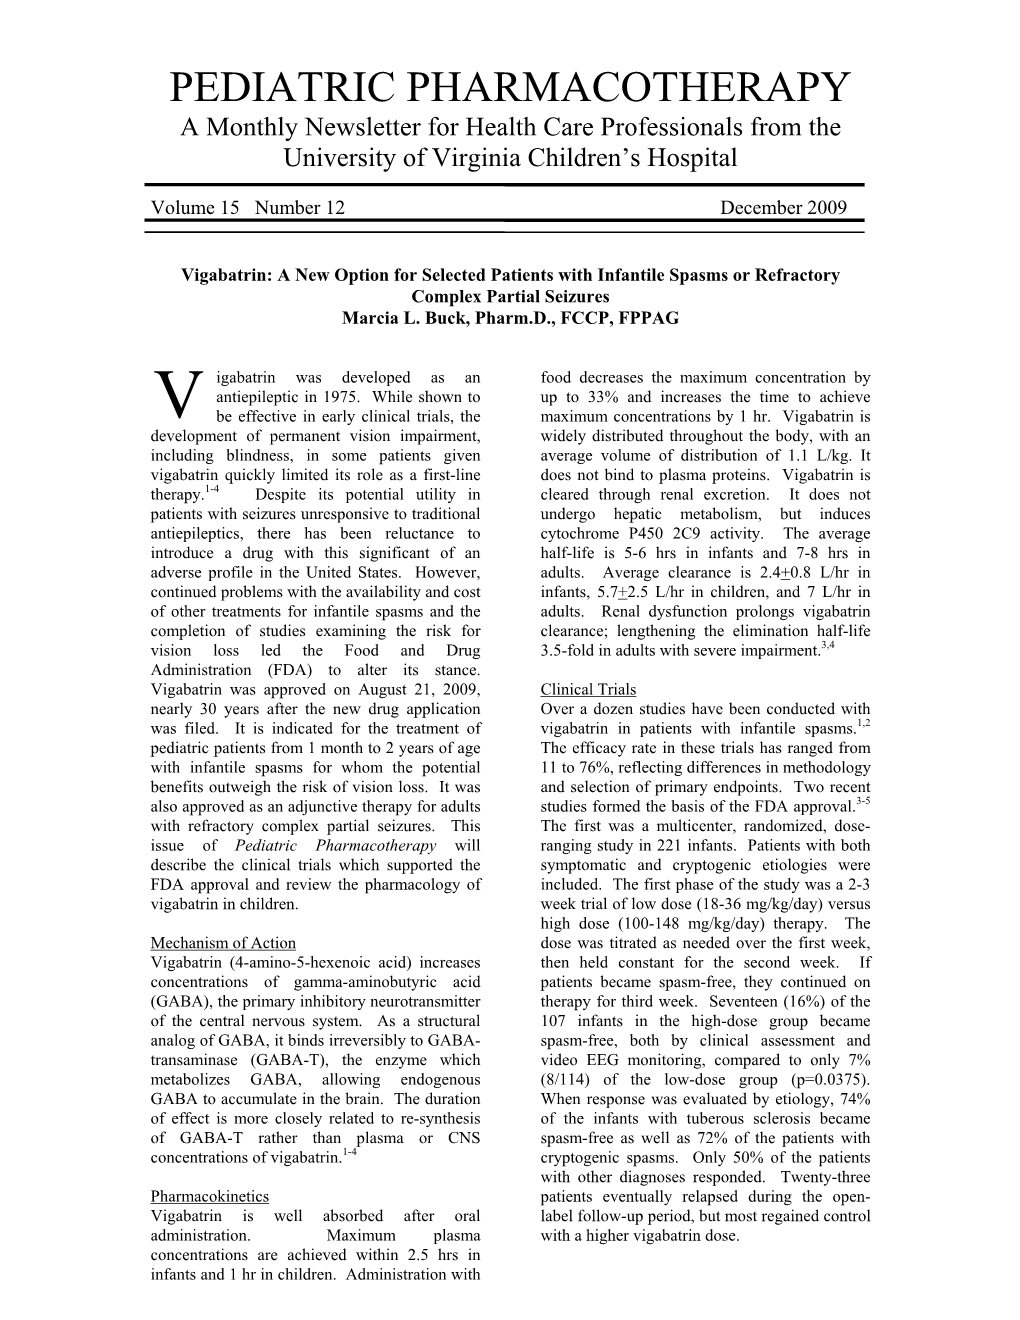 12 Vigabatrin: a New Option for Selected Patients with Infantile Spasms Or Refractory Complex Partial Seizures